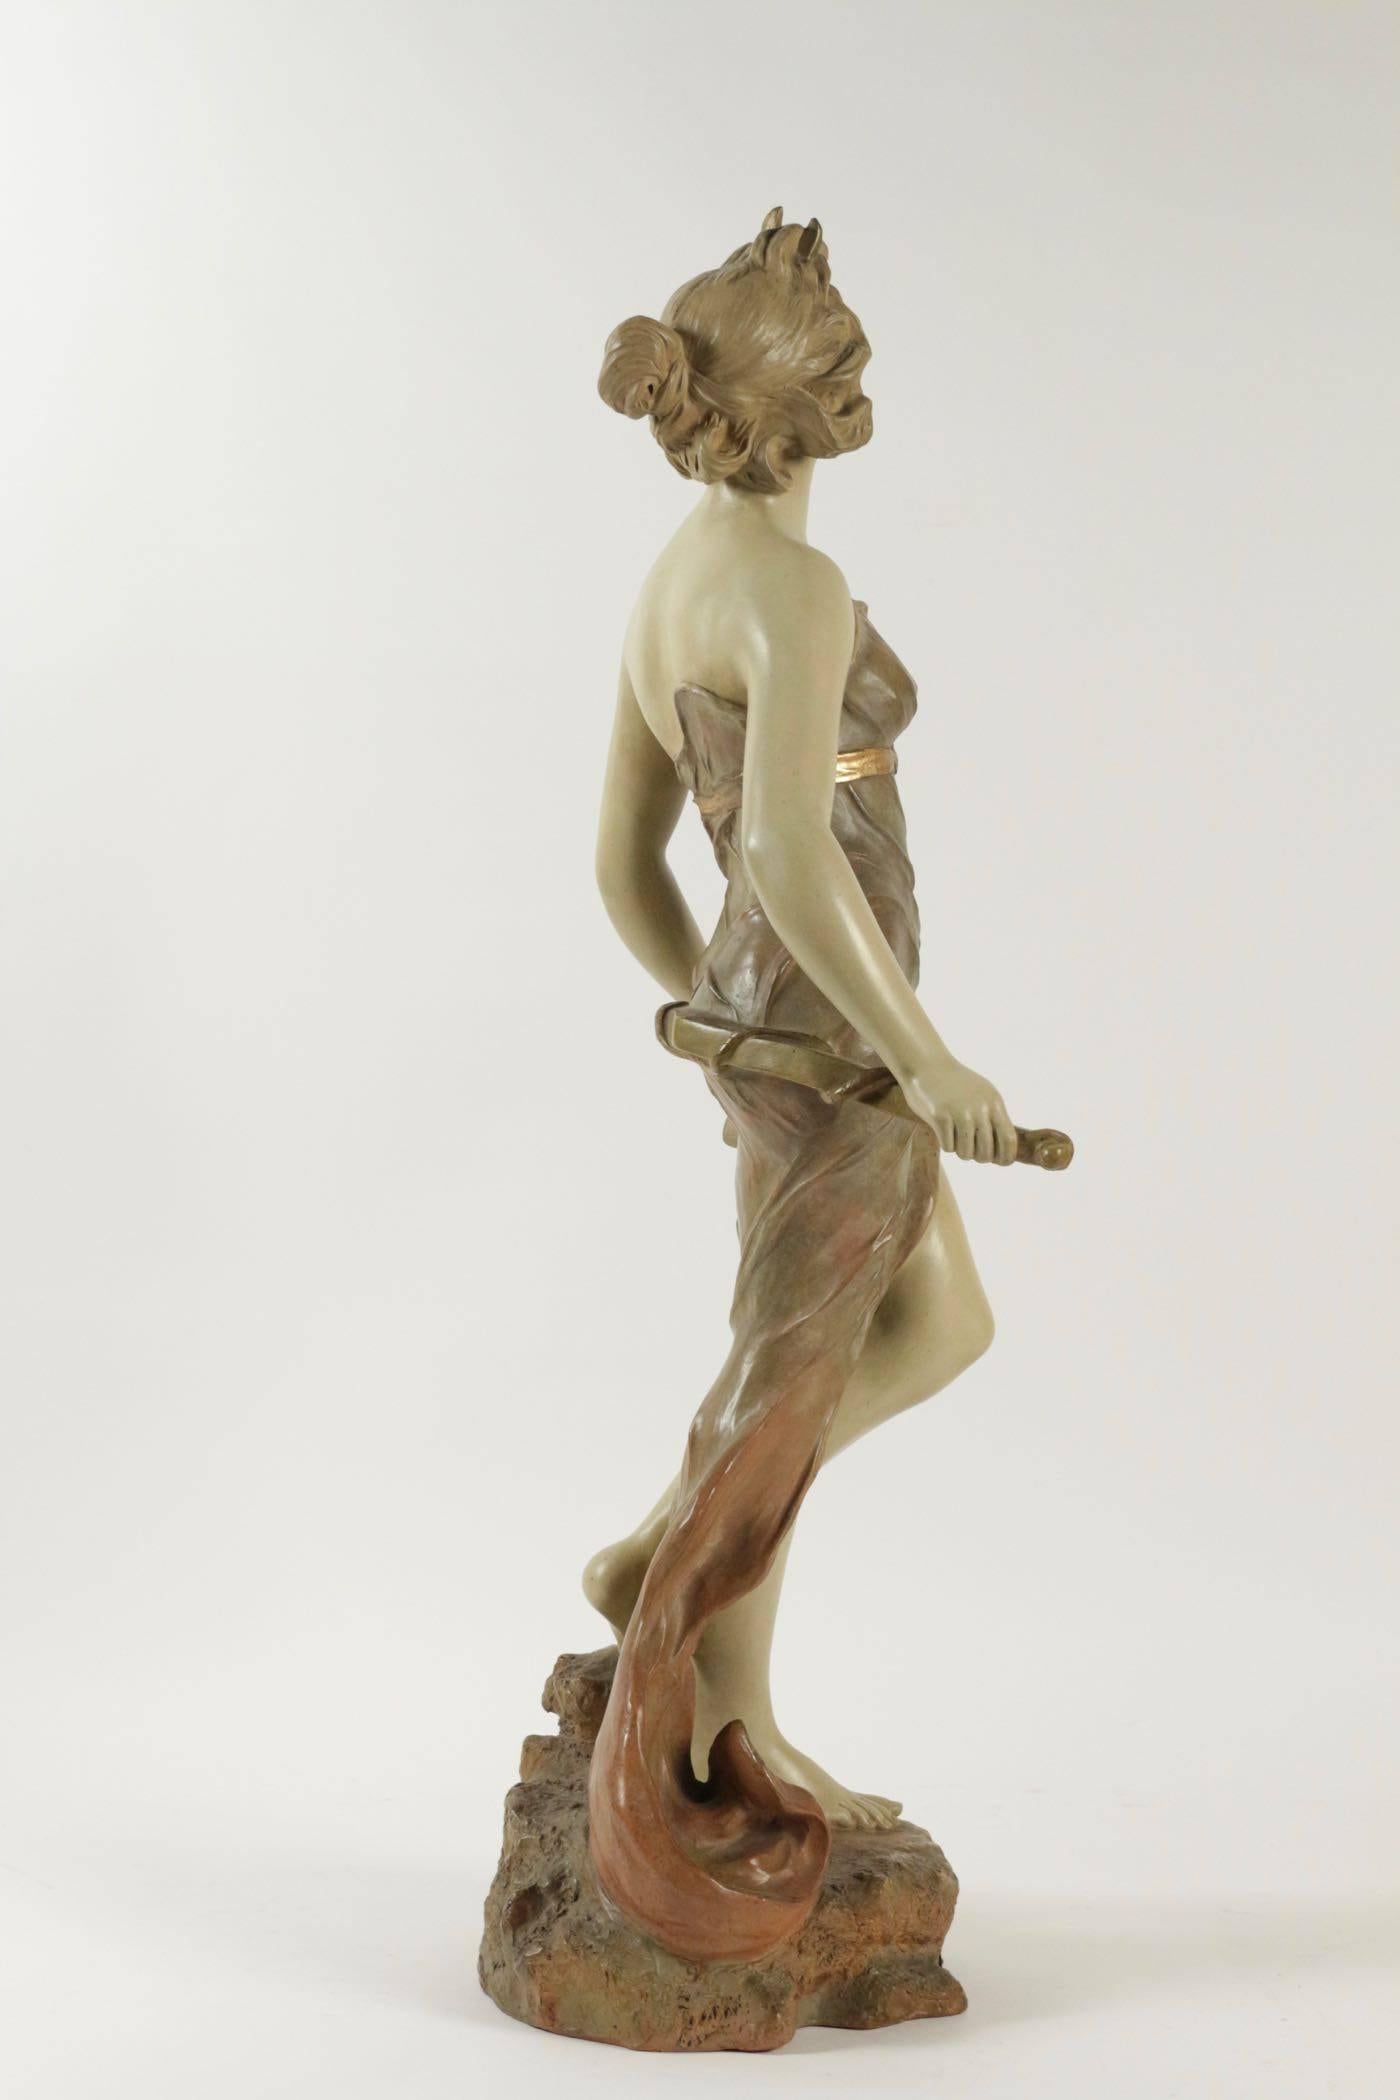 Early 20th Century Sculpture, Terracotta, 1900, Statue Representing Diane Chasseresse